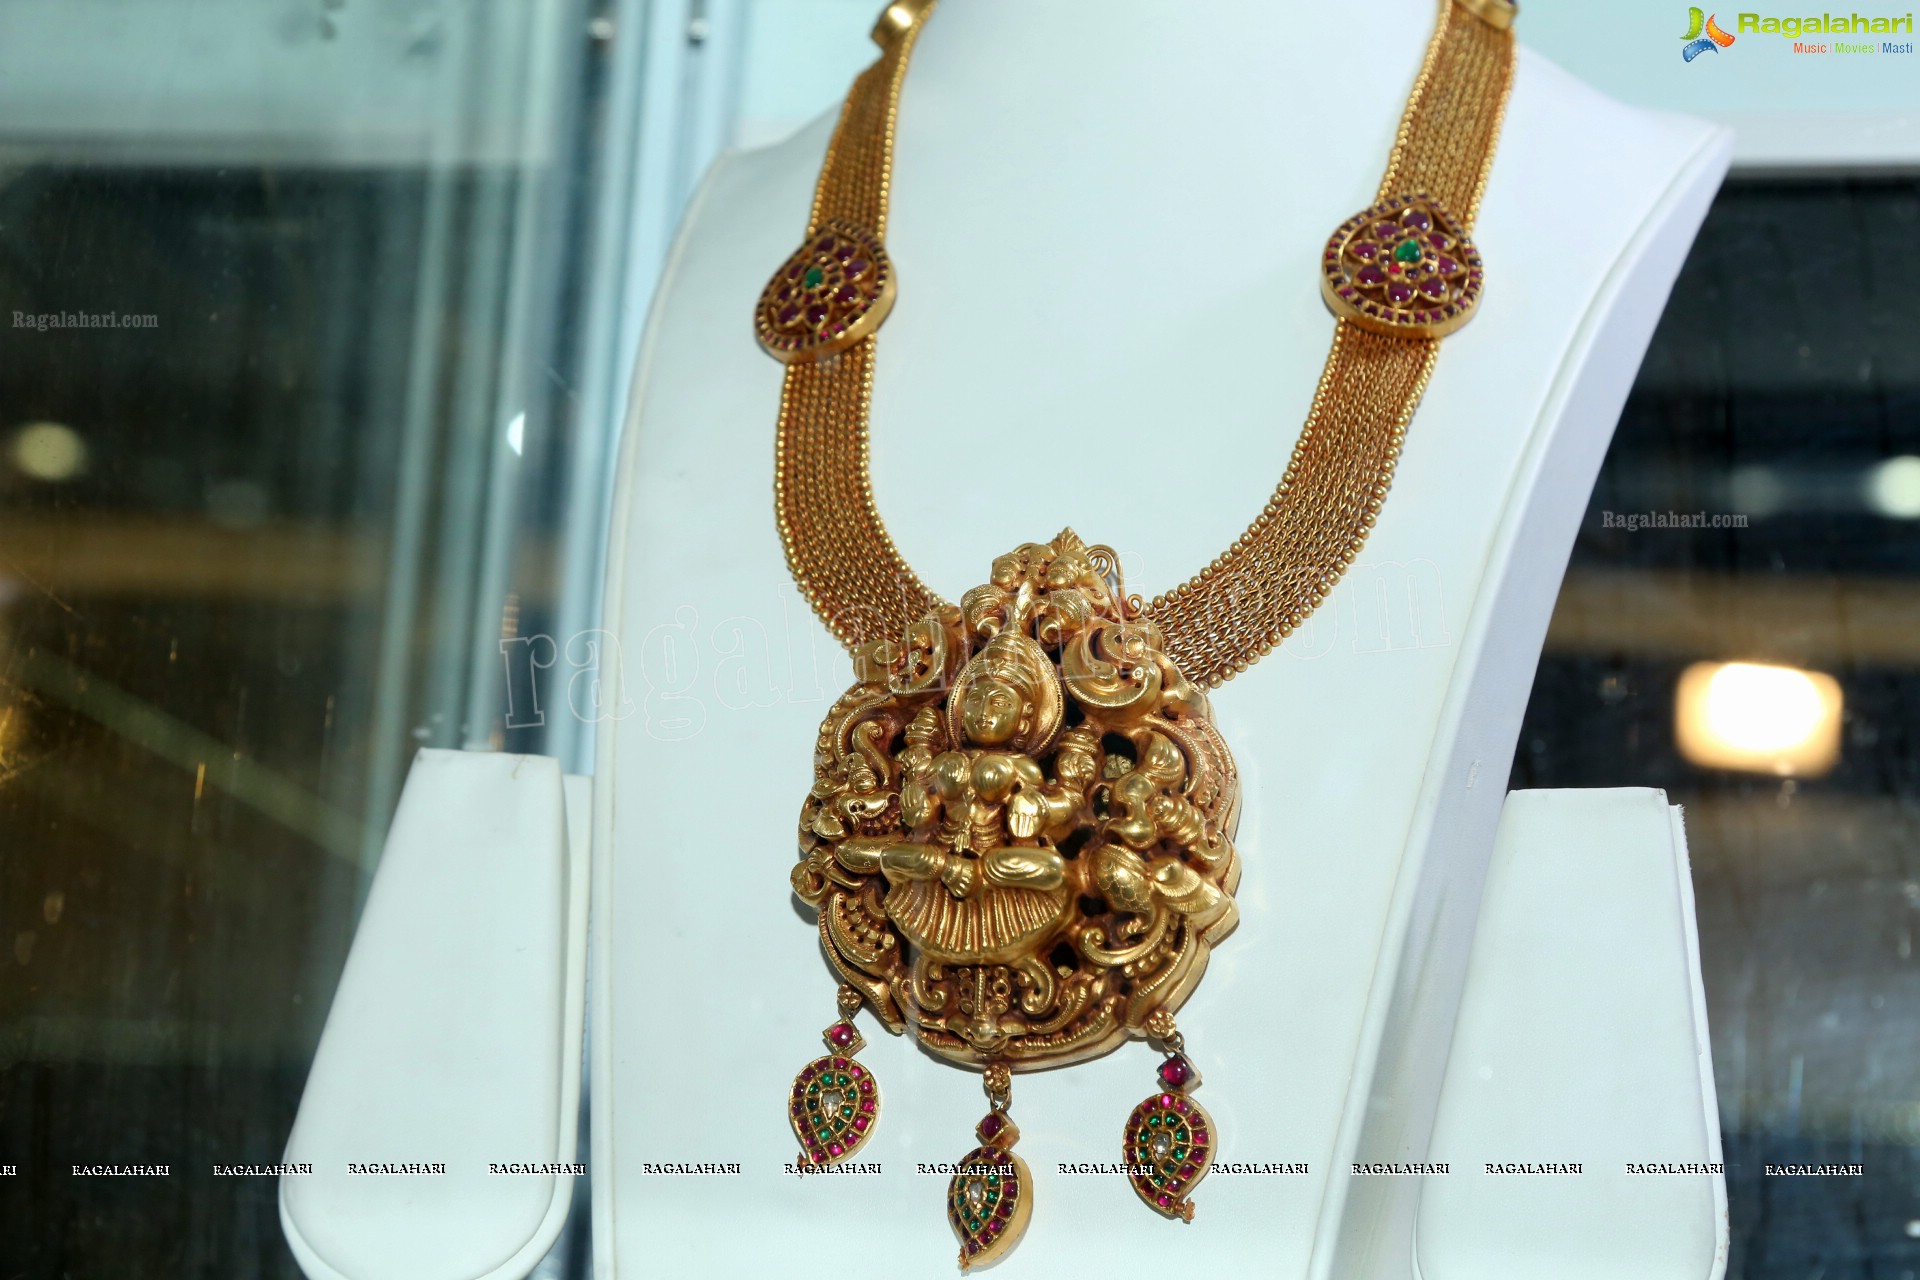 The 9th edition of Hyderabad Jewellery, Pearl and Gem Fair (HJF)